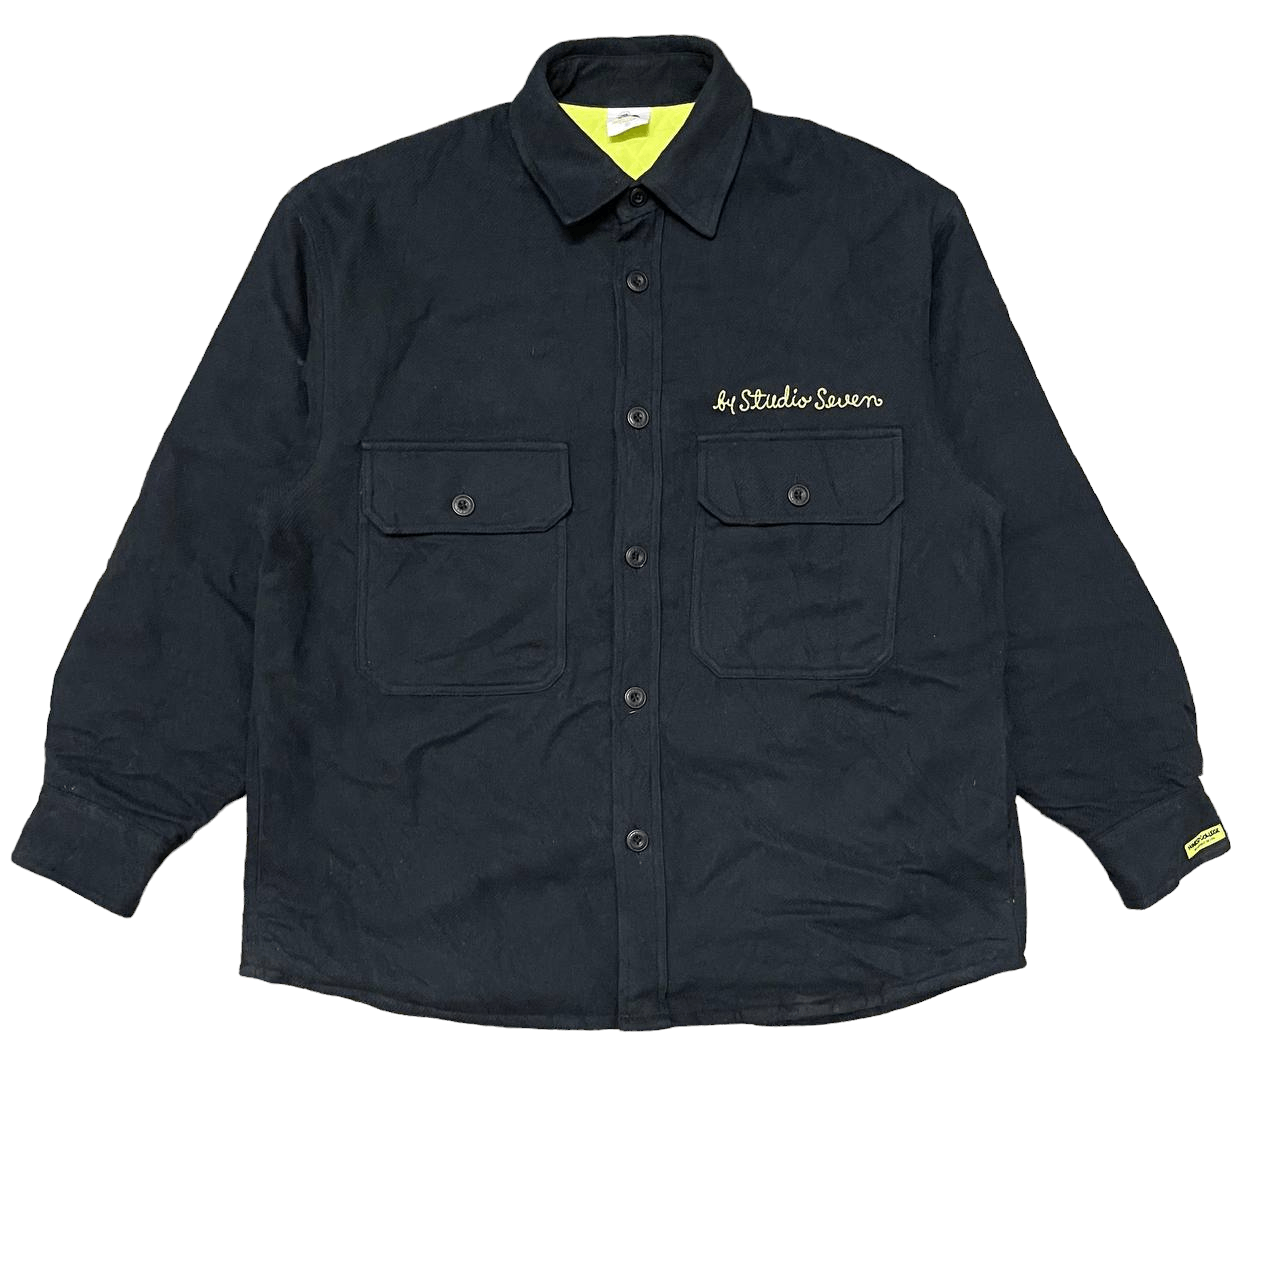 Japanese Brand - Vintage Honest College by Studio Seven Jacket Embroidery - 3